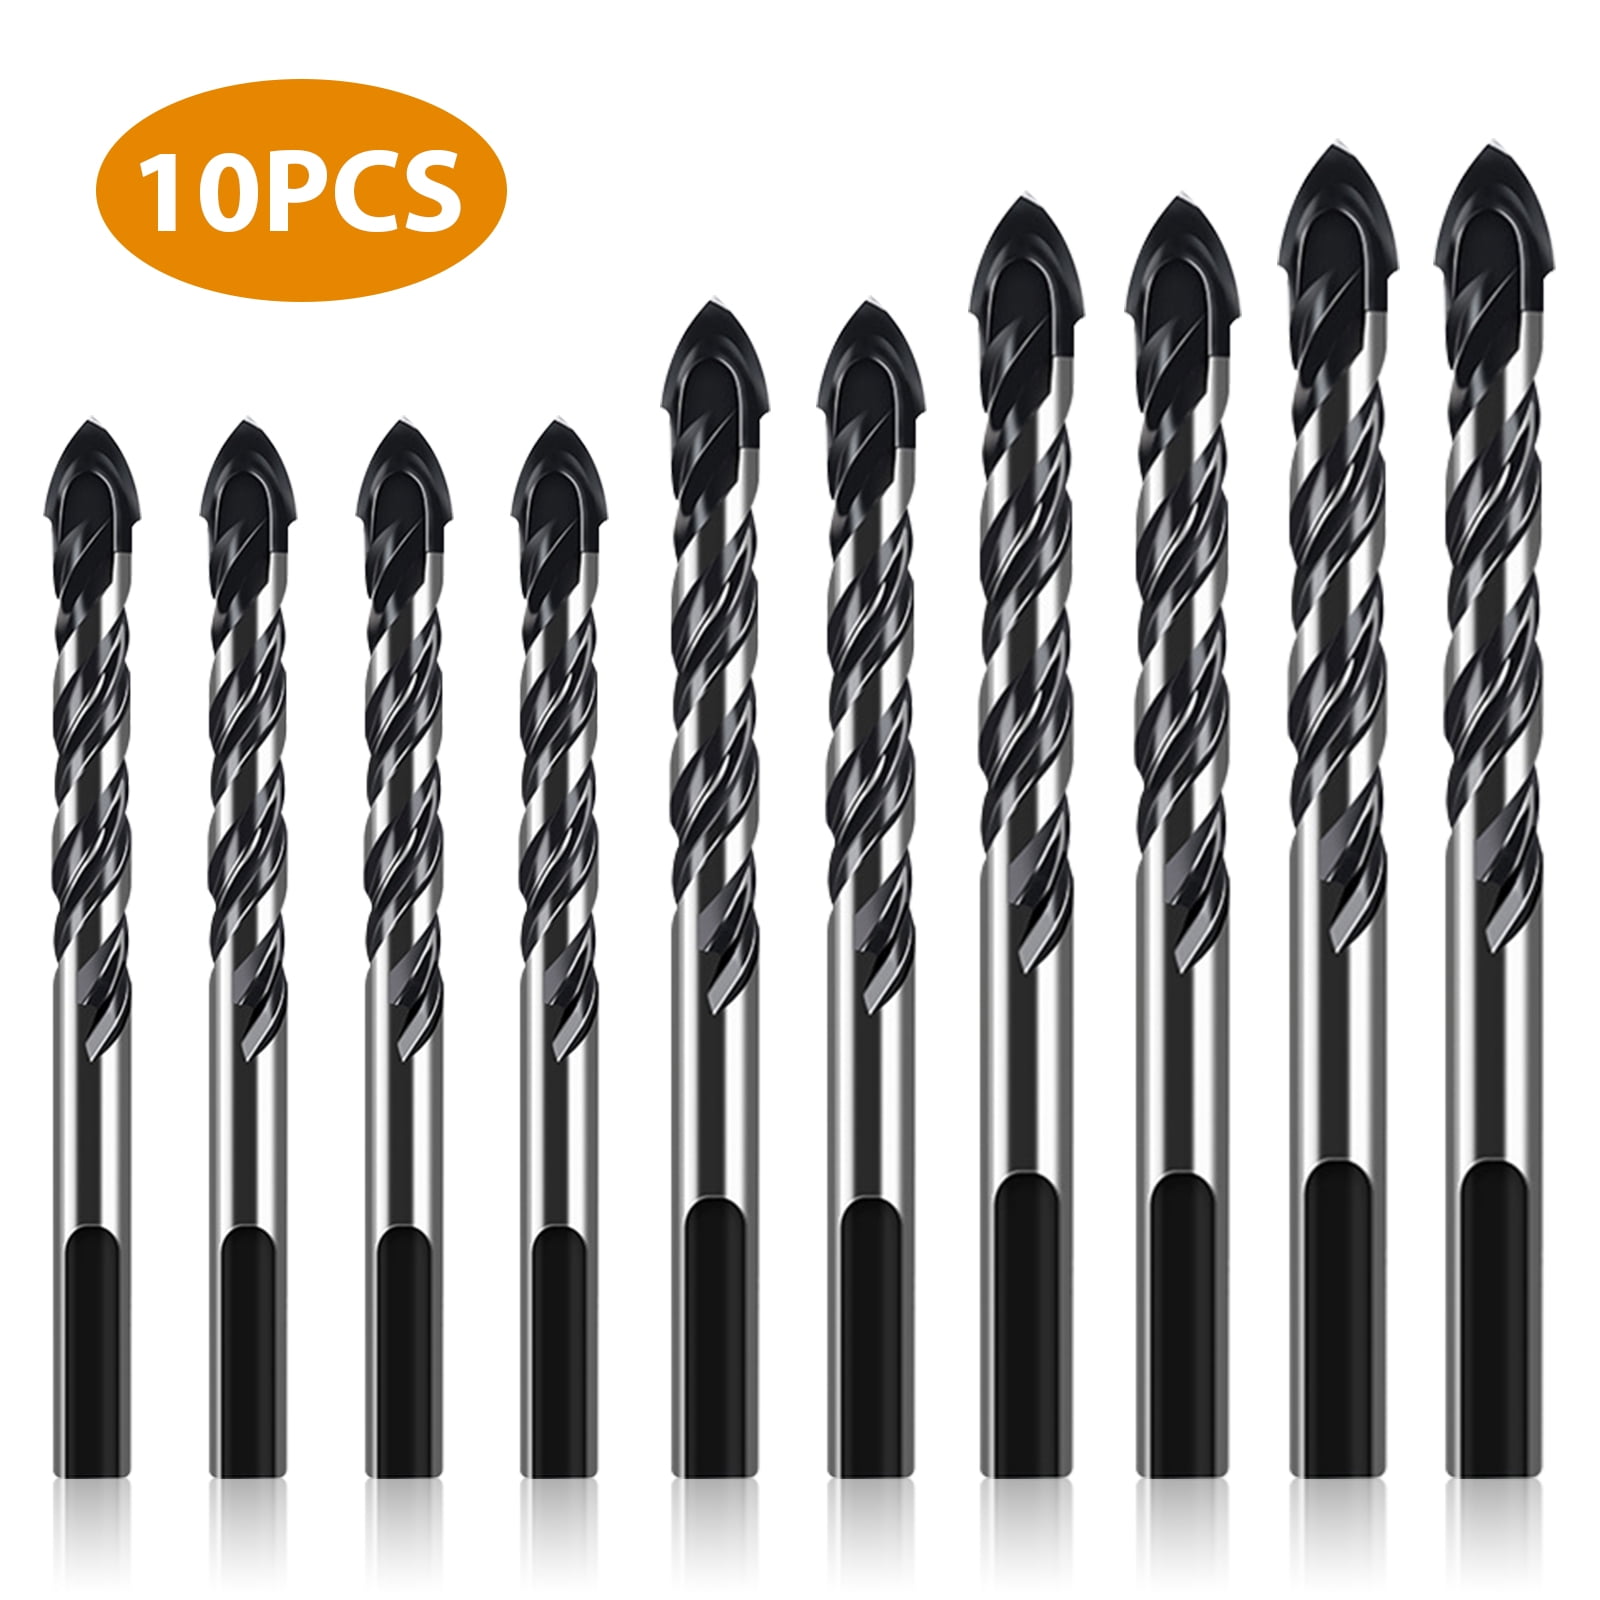 Strong and Sturdy Drill Bit Set of 5 Multi-Material Carbide Drill Bits for Ceramic Tiles Concrete Brick Glass Plastic Masonry and Wood Long Lasting 